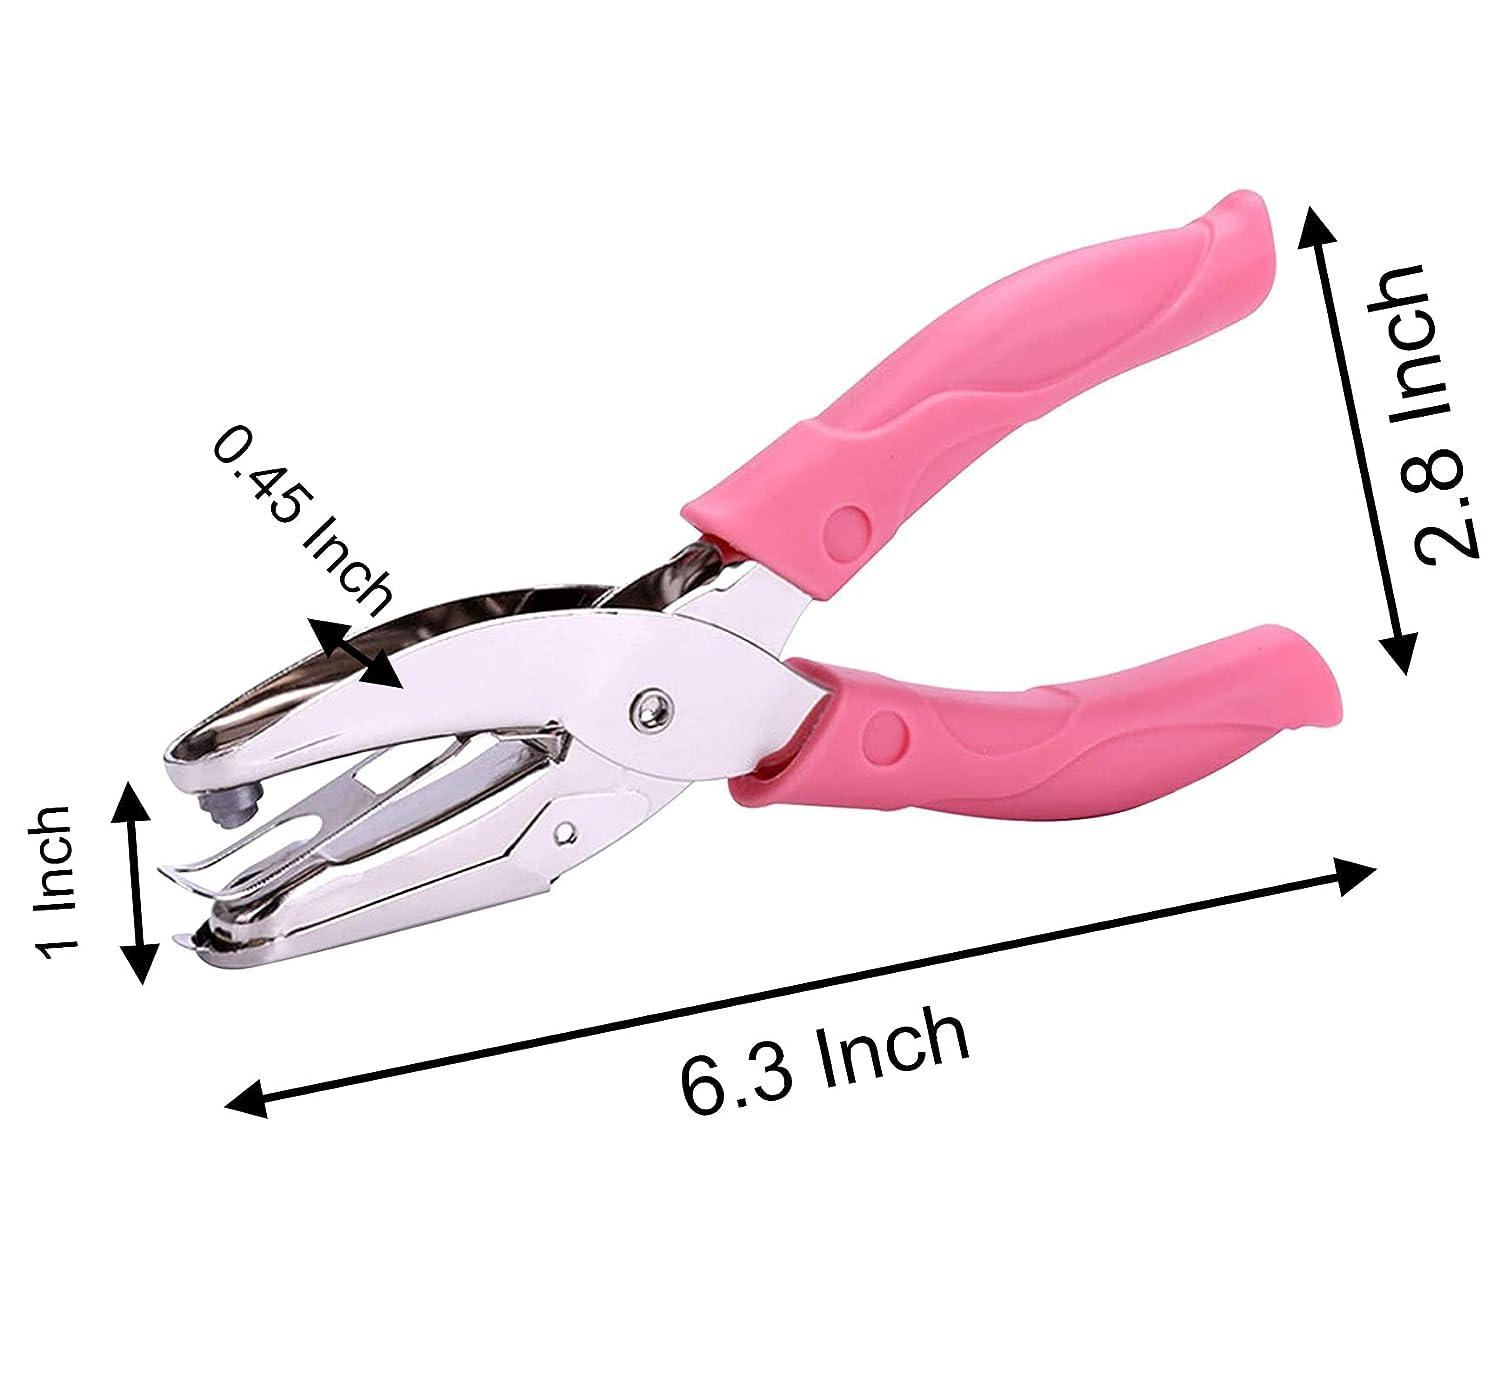 Star Shape Single Paper Hole Punch 1 Pack 6.3 inch Length 1/4 inch of Diameter of Hole Handheld Puncher with Pink Soft Thick Leather Cover(Star 1/4